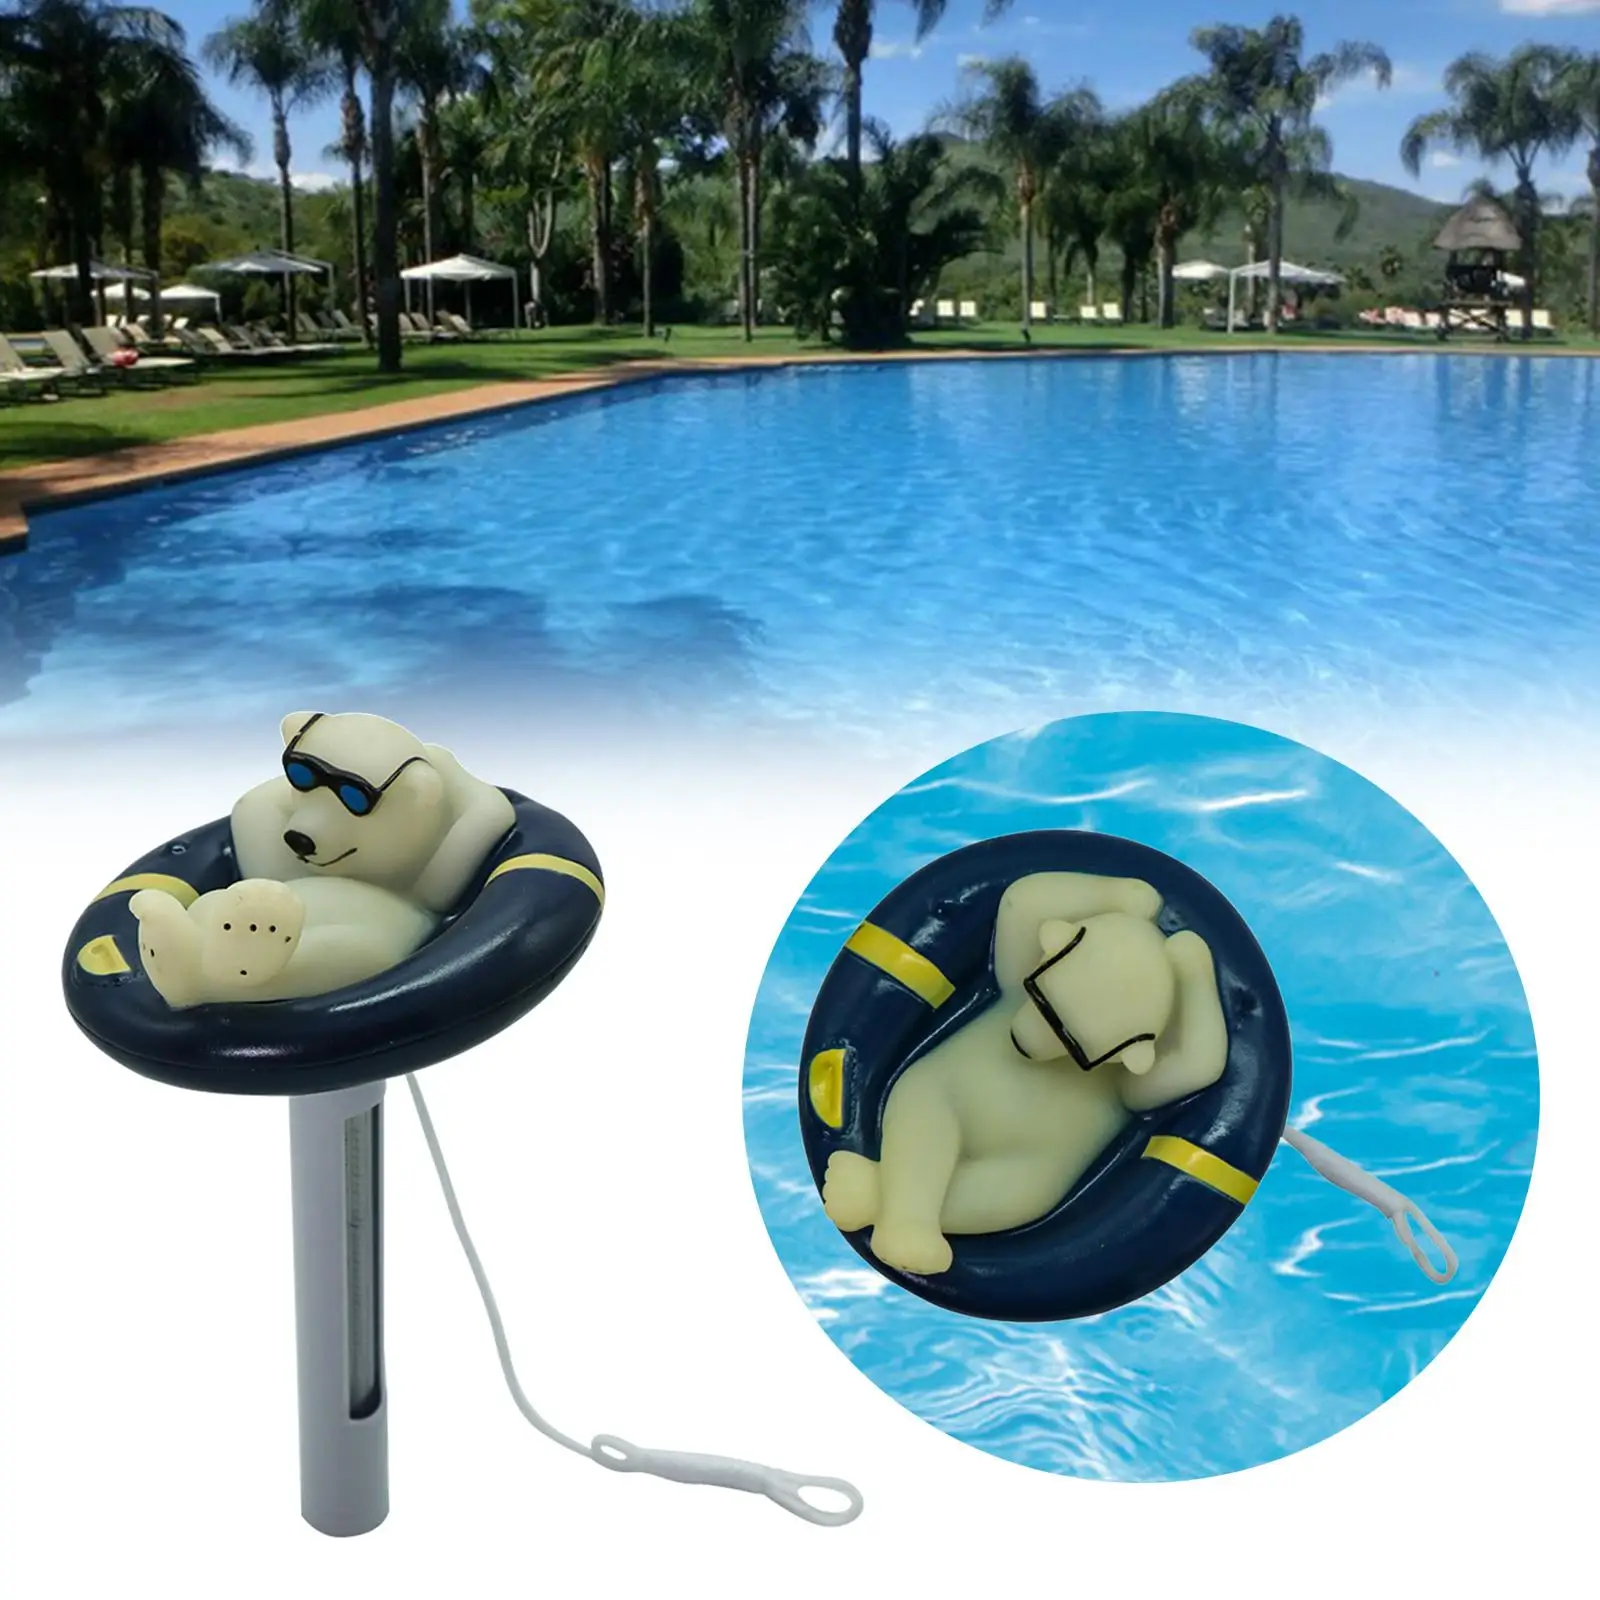 Polar Bear Swimming Pool Thermometer Measurement Tool Floating Bath Water Thermometer for Aquariums Baby Pool Hot Tubs Easy Read